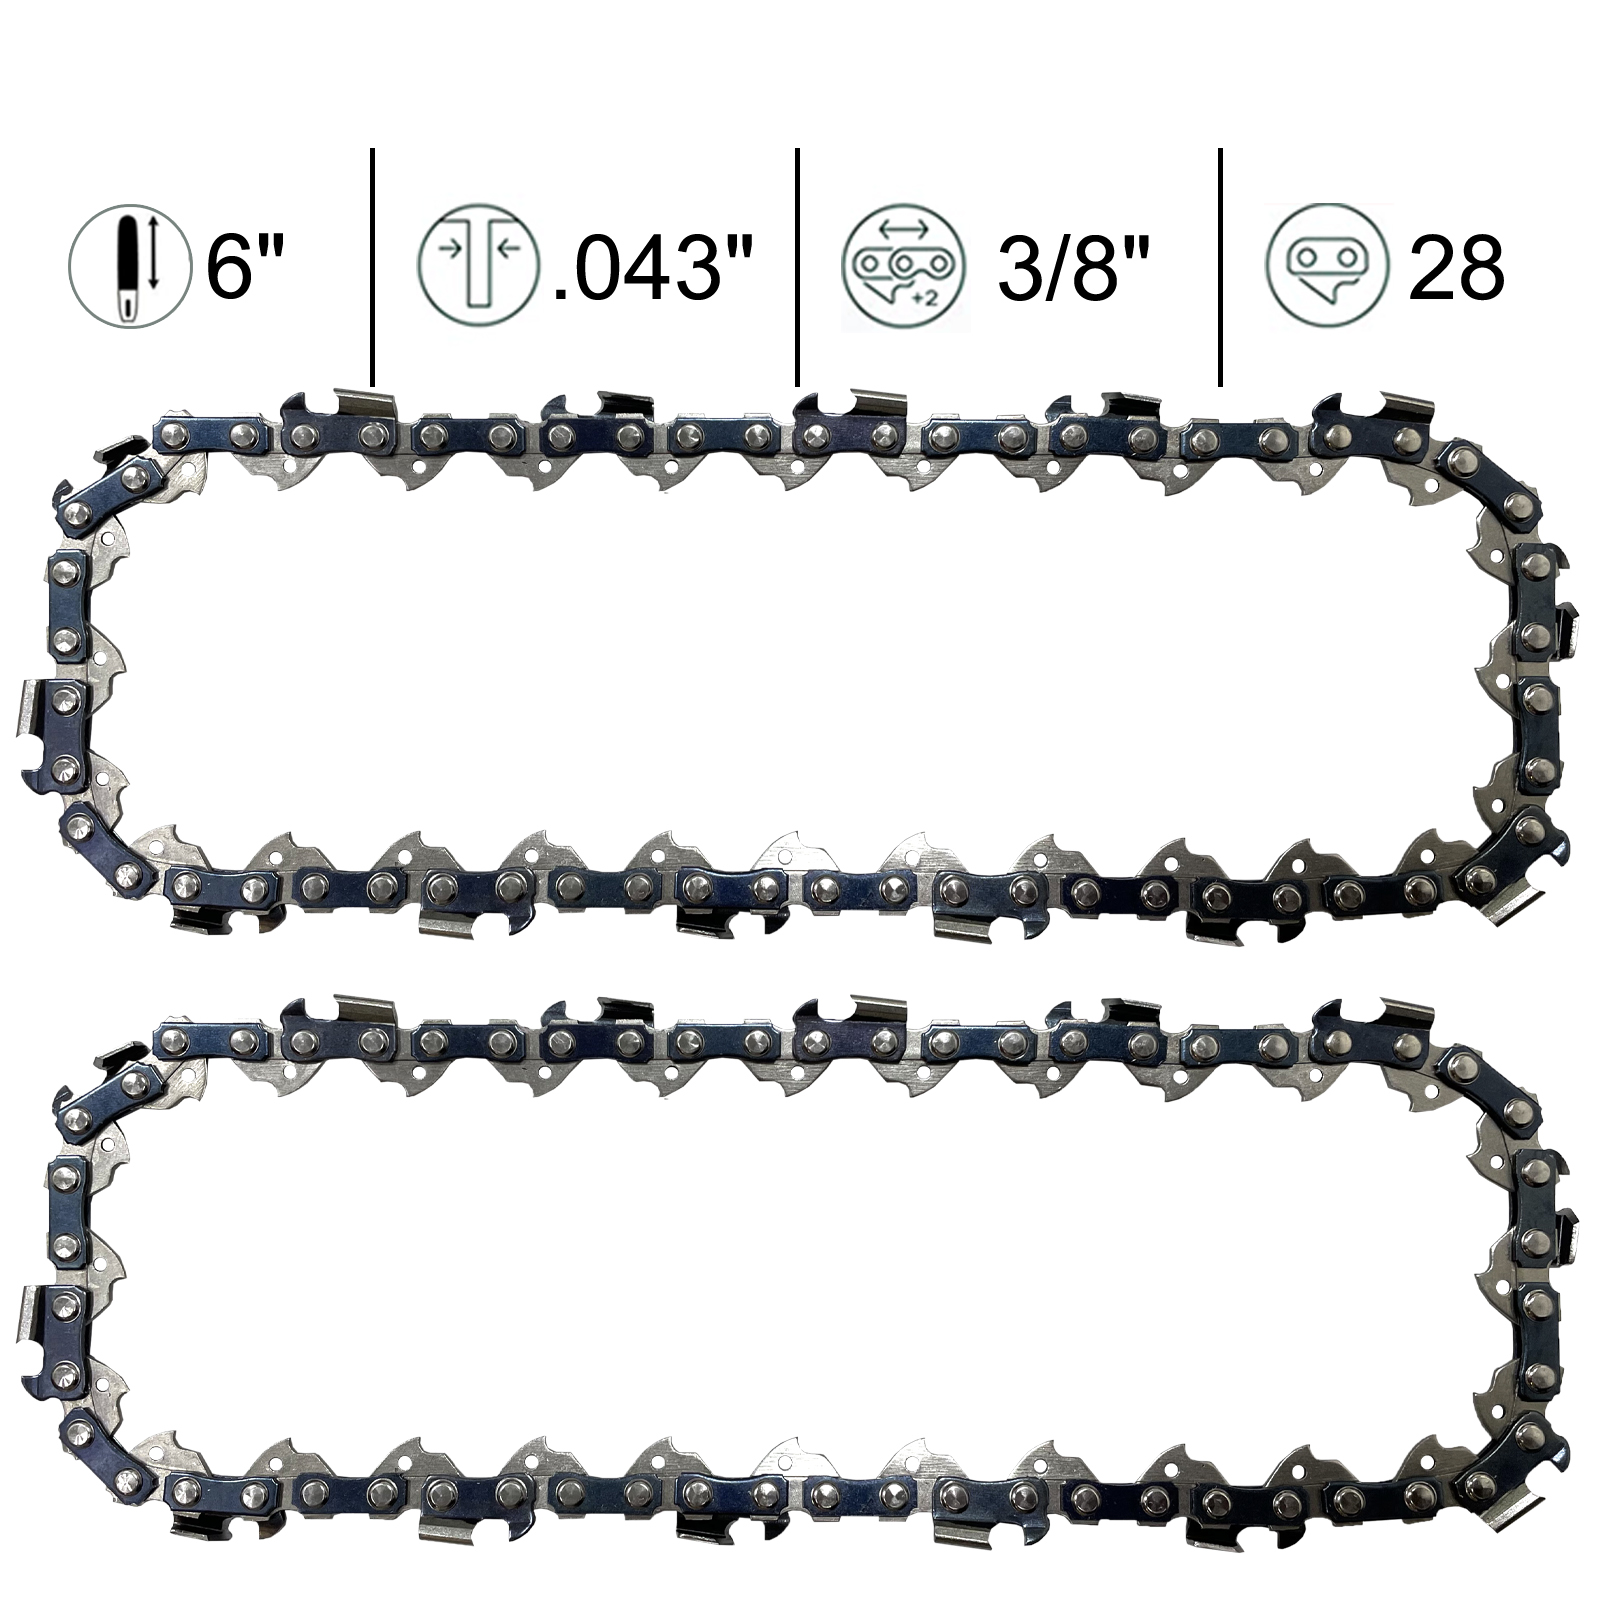 2PCS 6" Chainsaw Chain Replacement for Milwaukee M12 FUEL 12-Volt Lithium-Ion Chainsaw 3/8 043 28dl - image 1 of 7